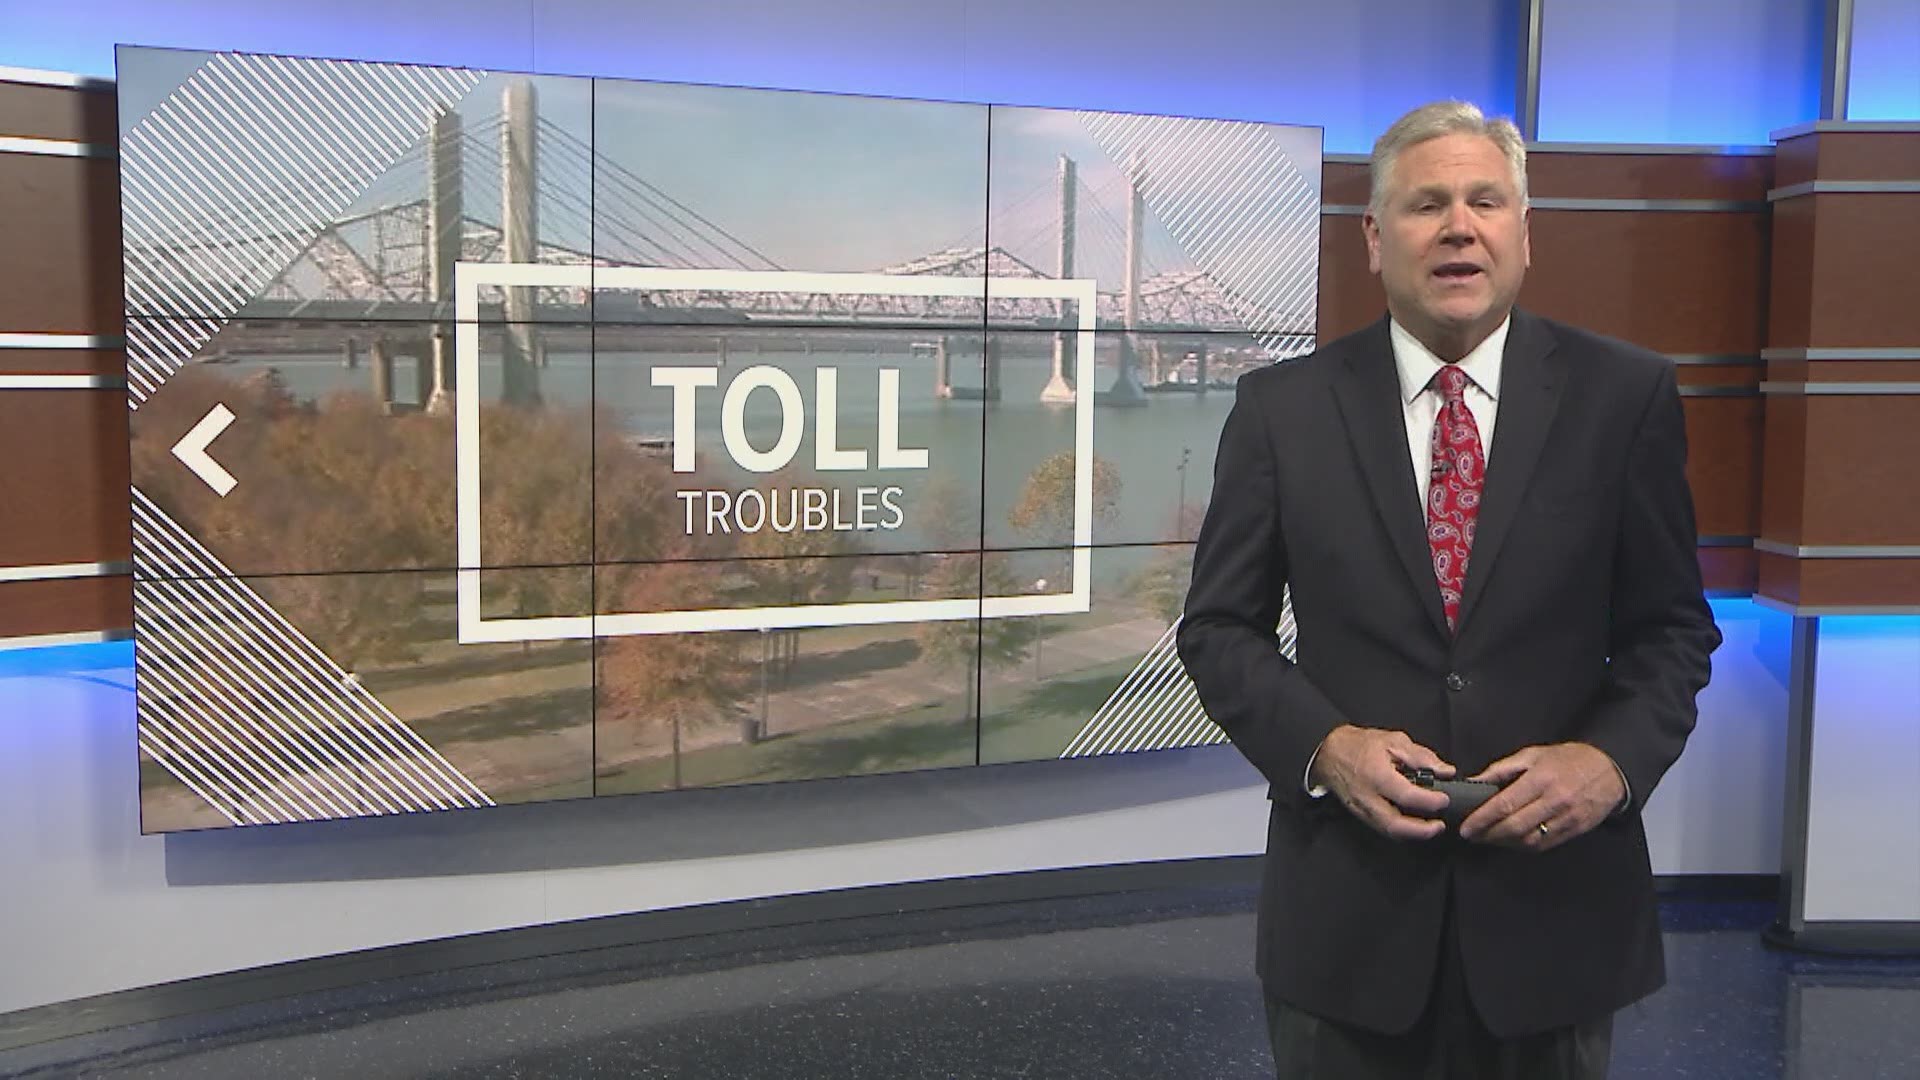 Kentucky and Indiana drivers are becoming more frustrated after facing daily issues with the toll service.